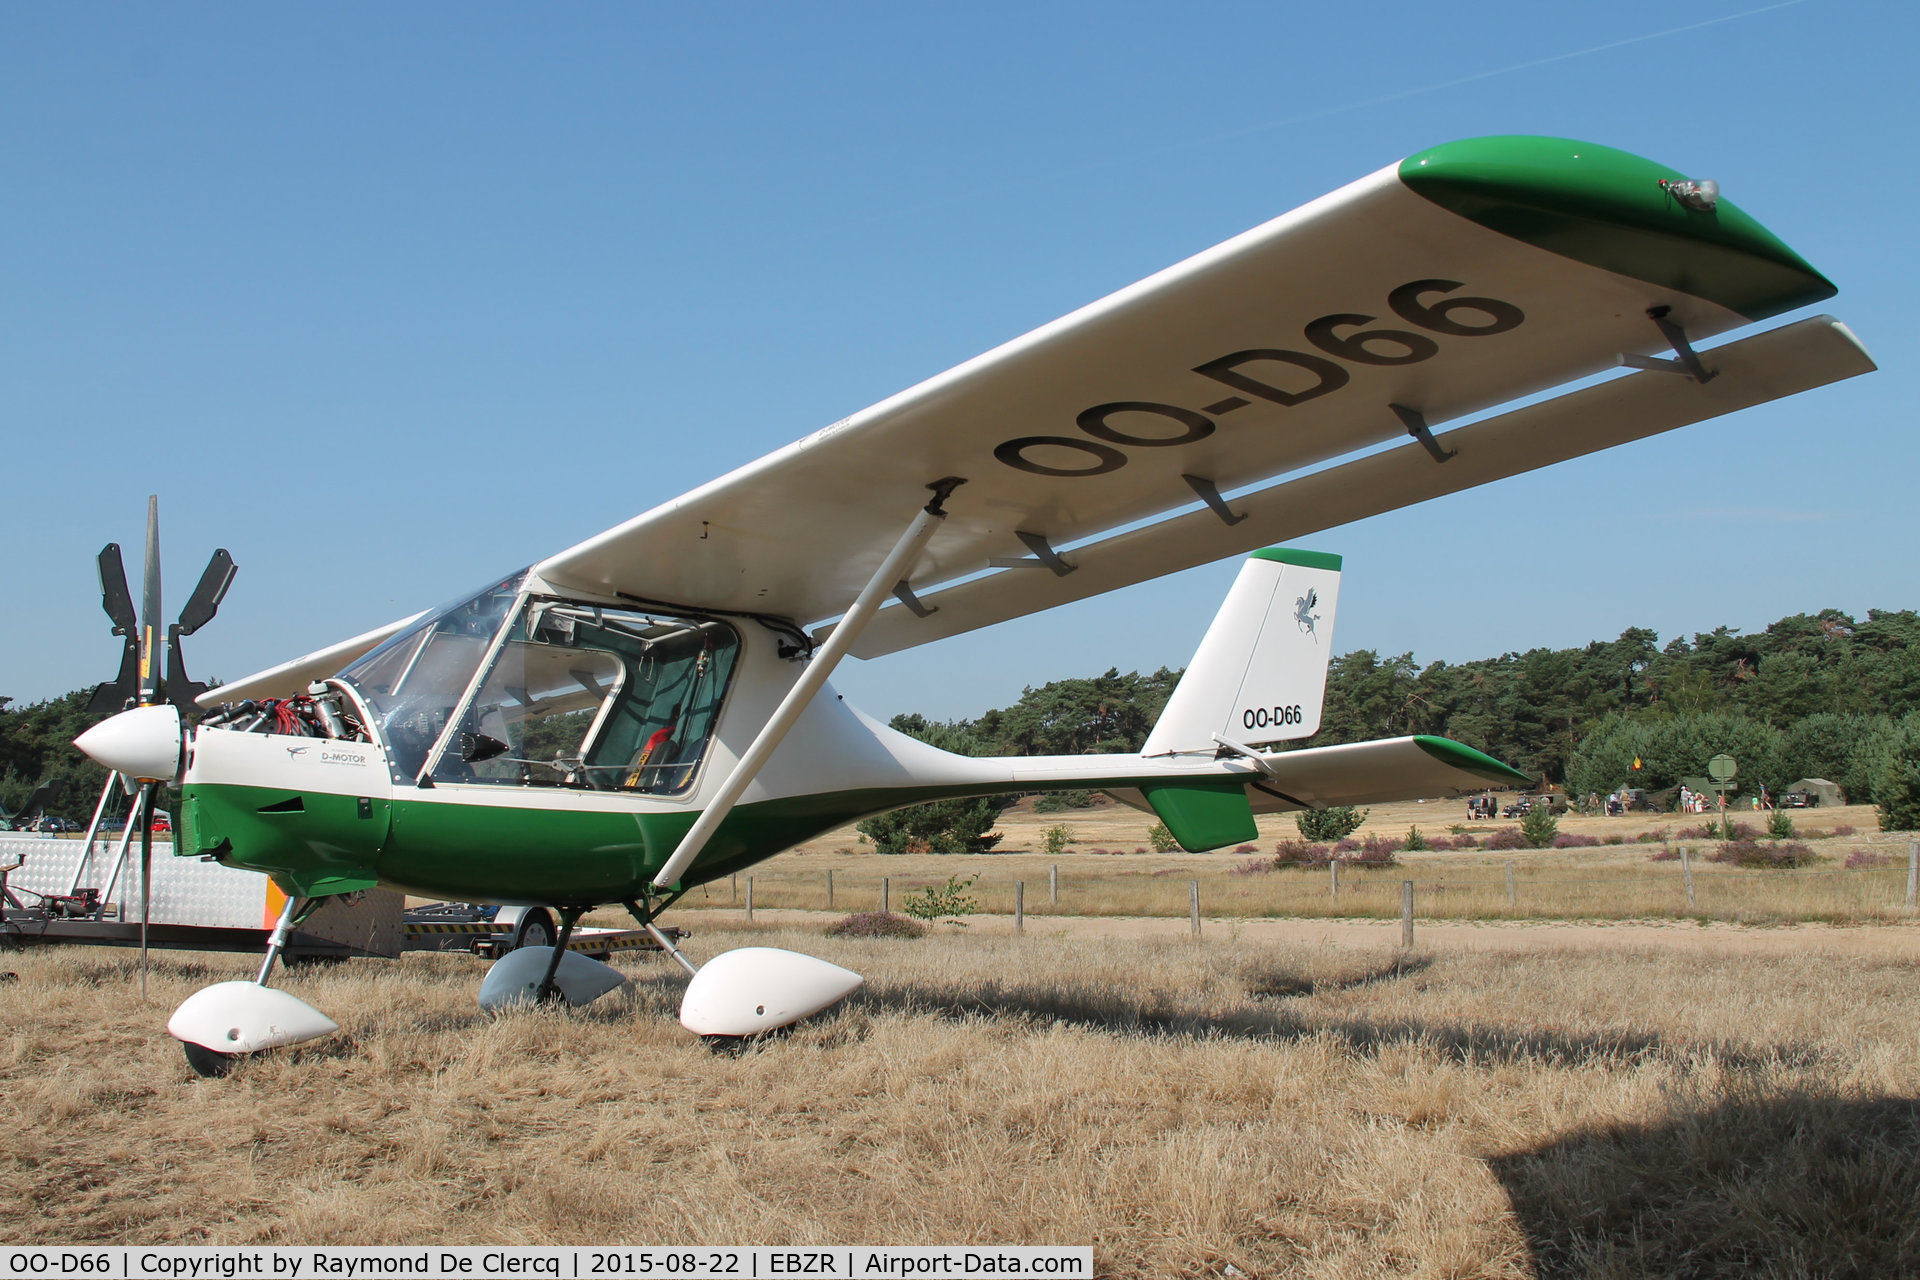 OO-D66, Fly Synthesis Storch C/N 250, Zoersel Fly-in 2015.